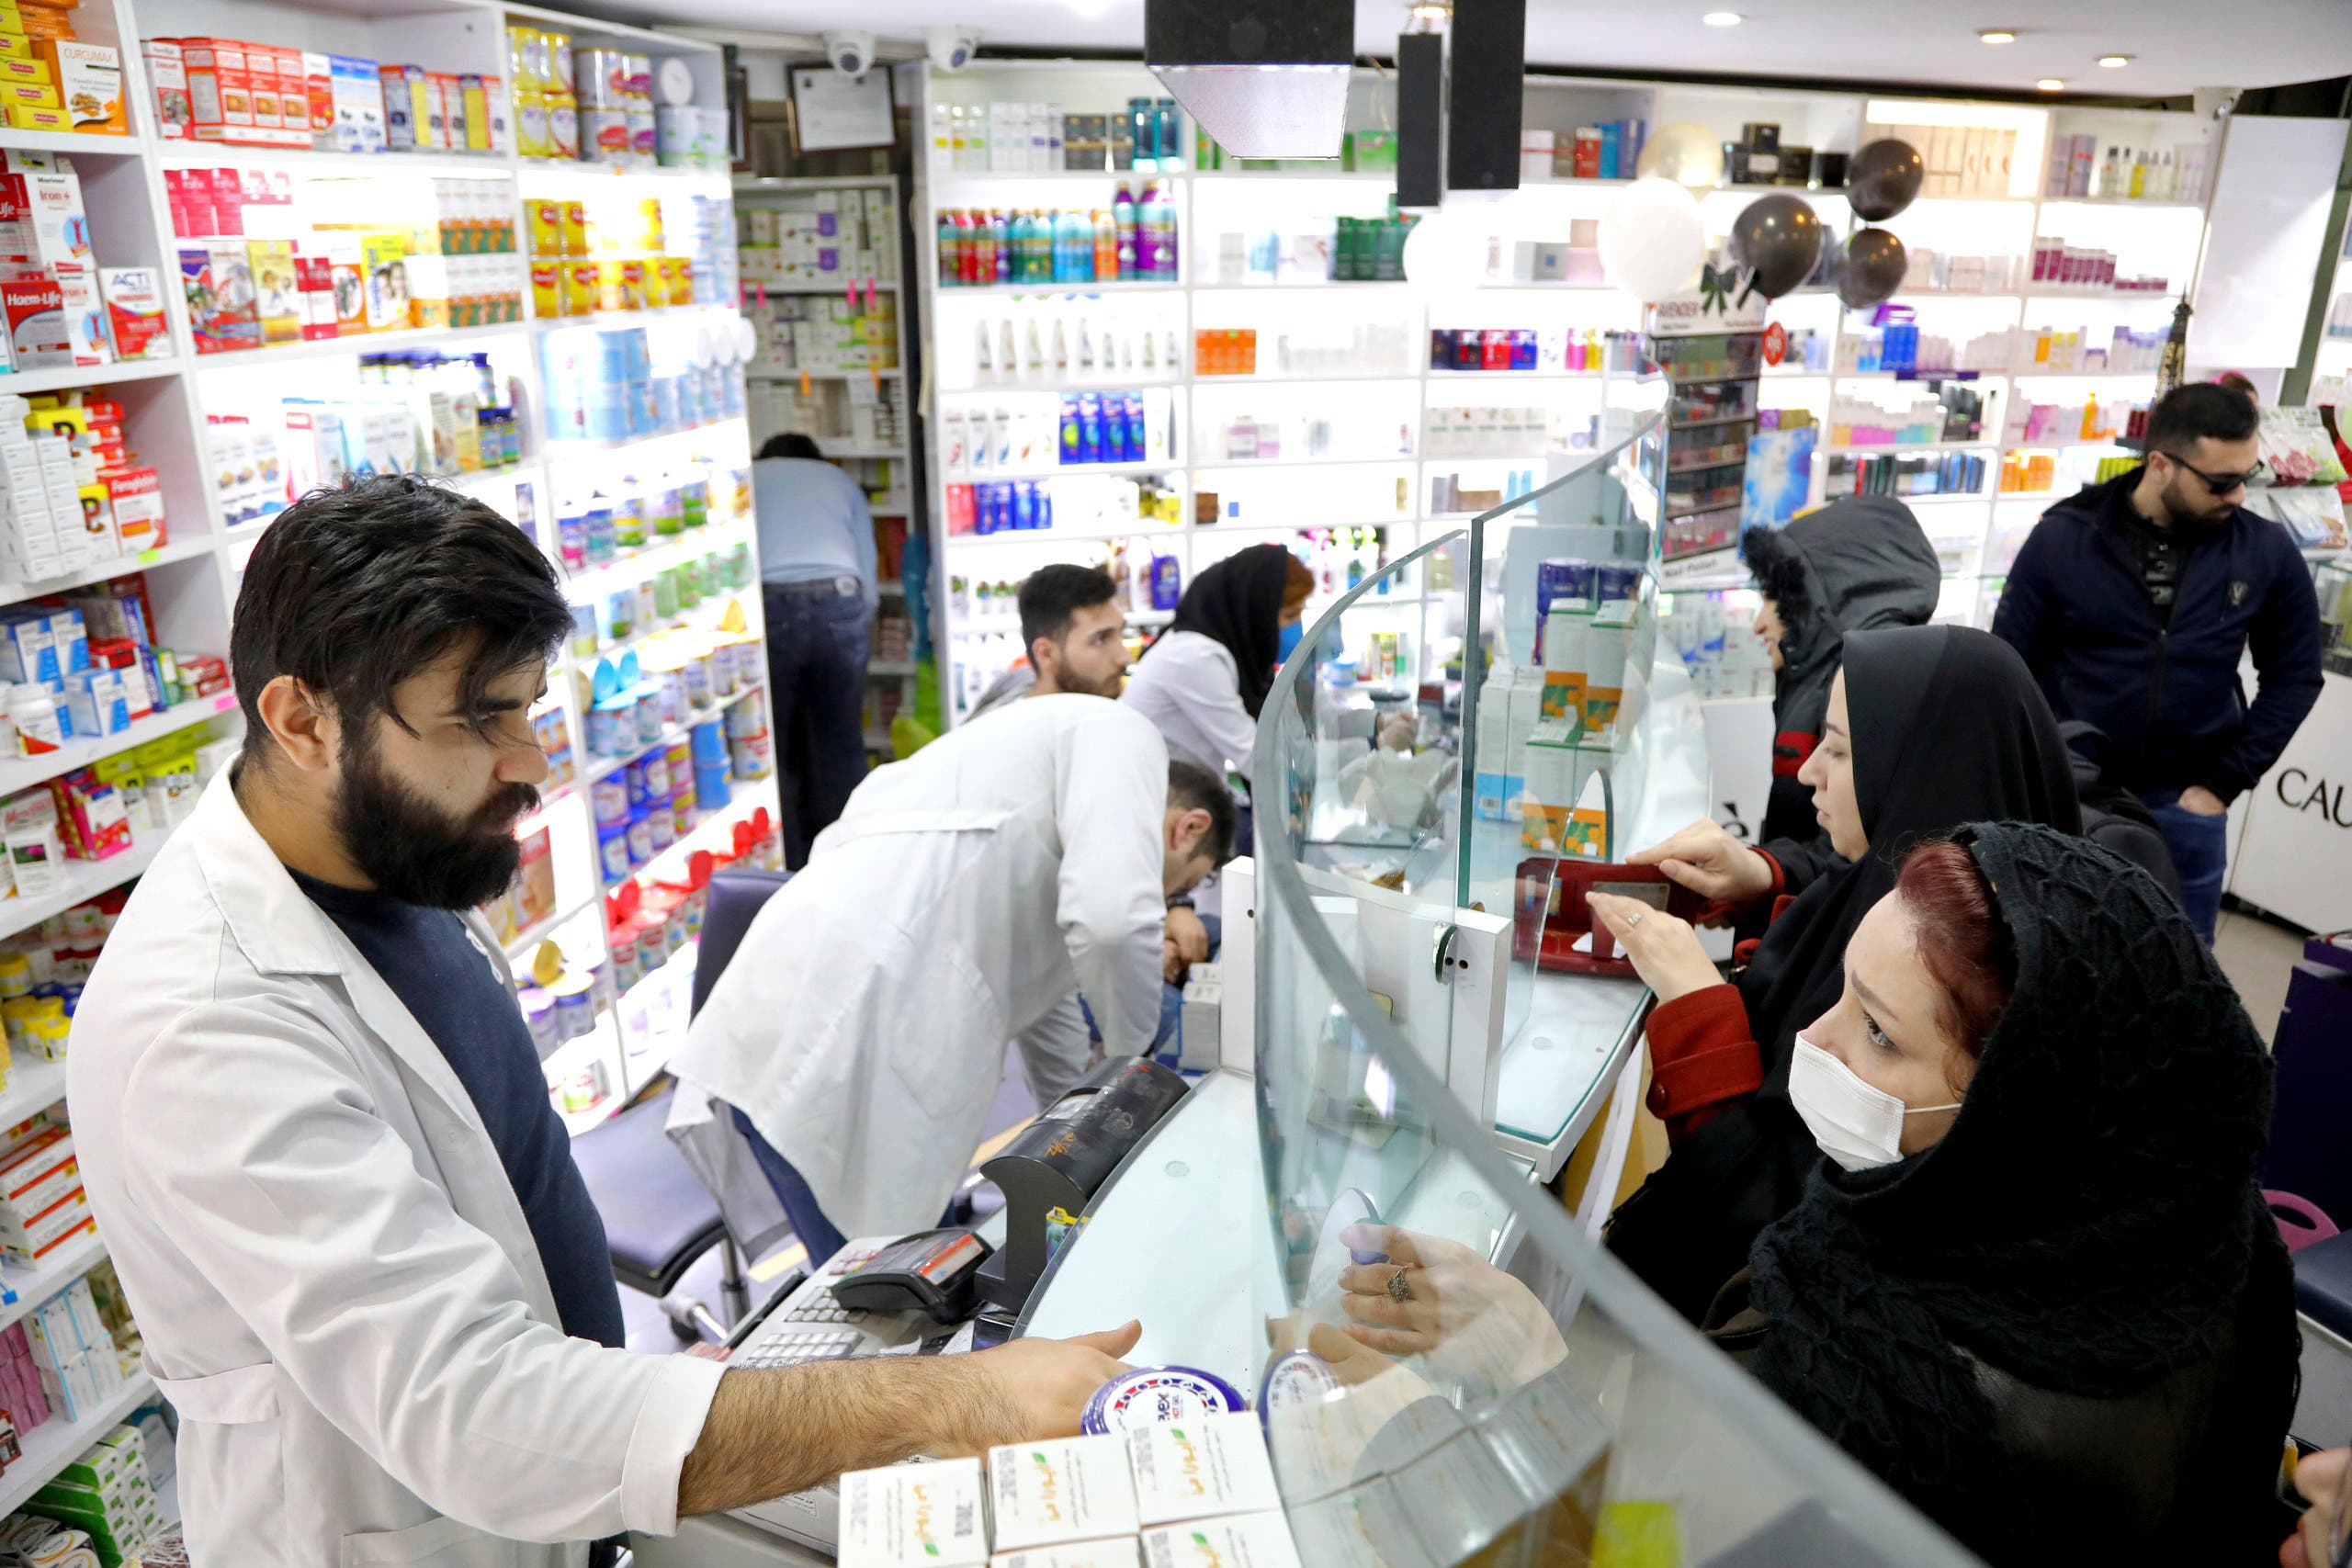 Pharmacists talk with customers at a drugstore in downtown Tehran on Feb. 25, 2020. (AP)